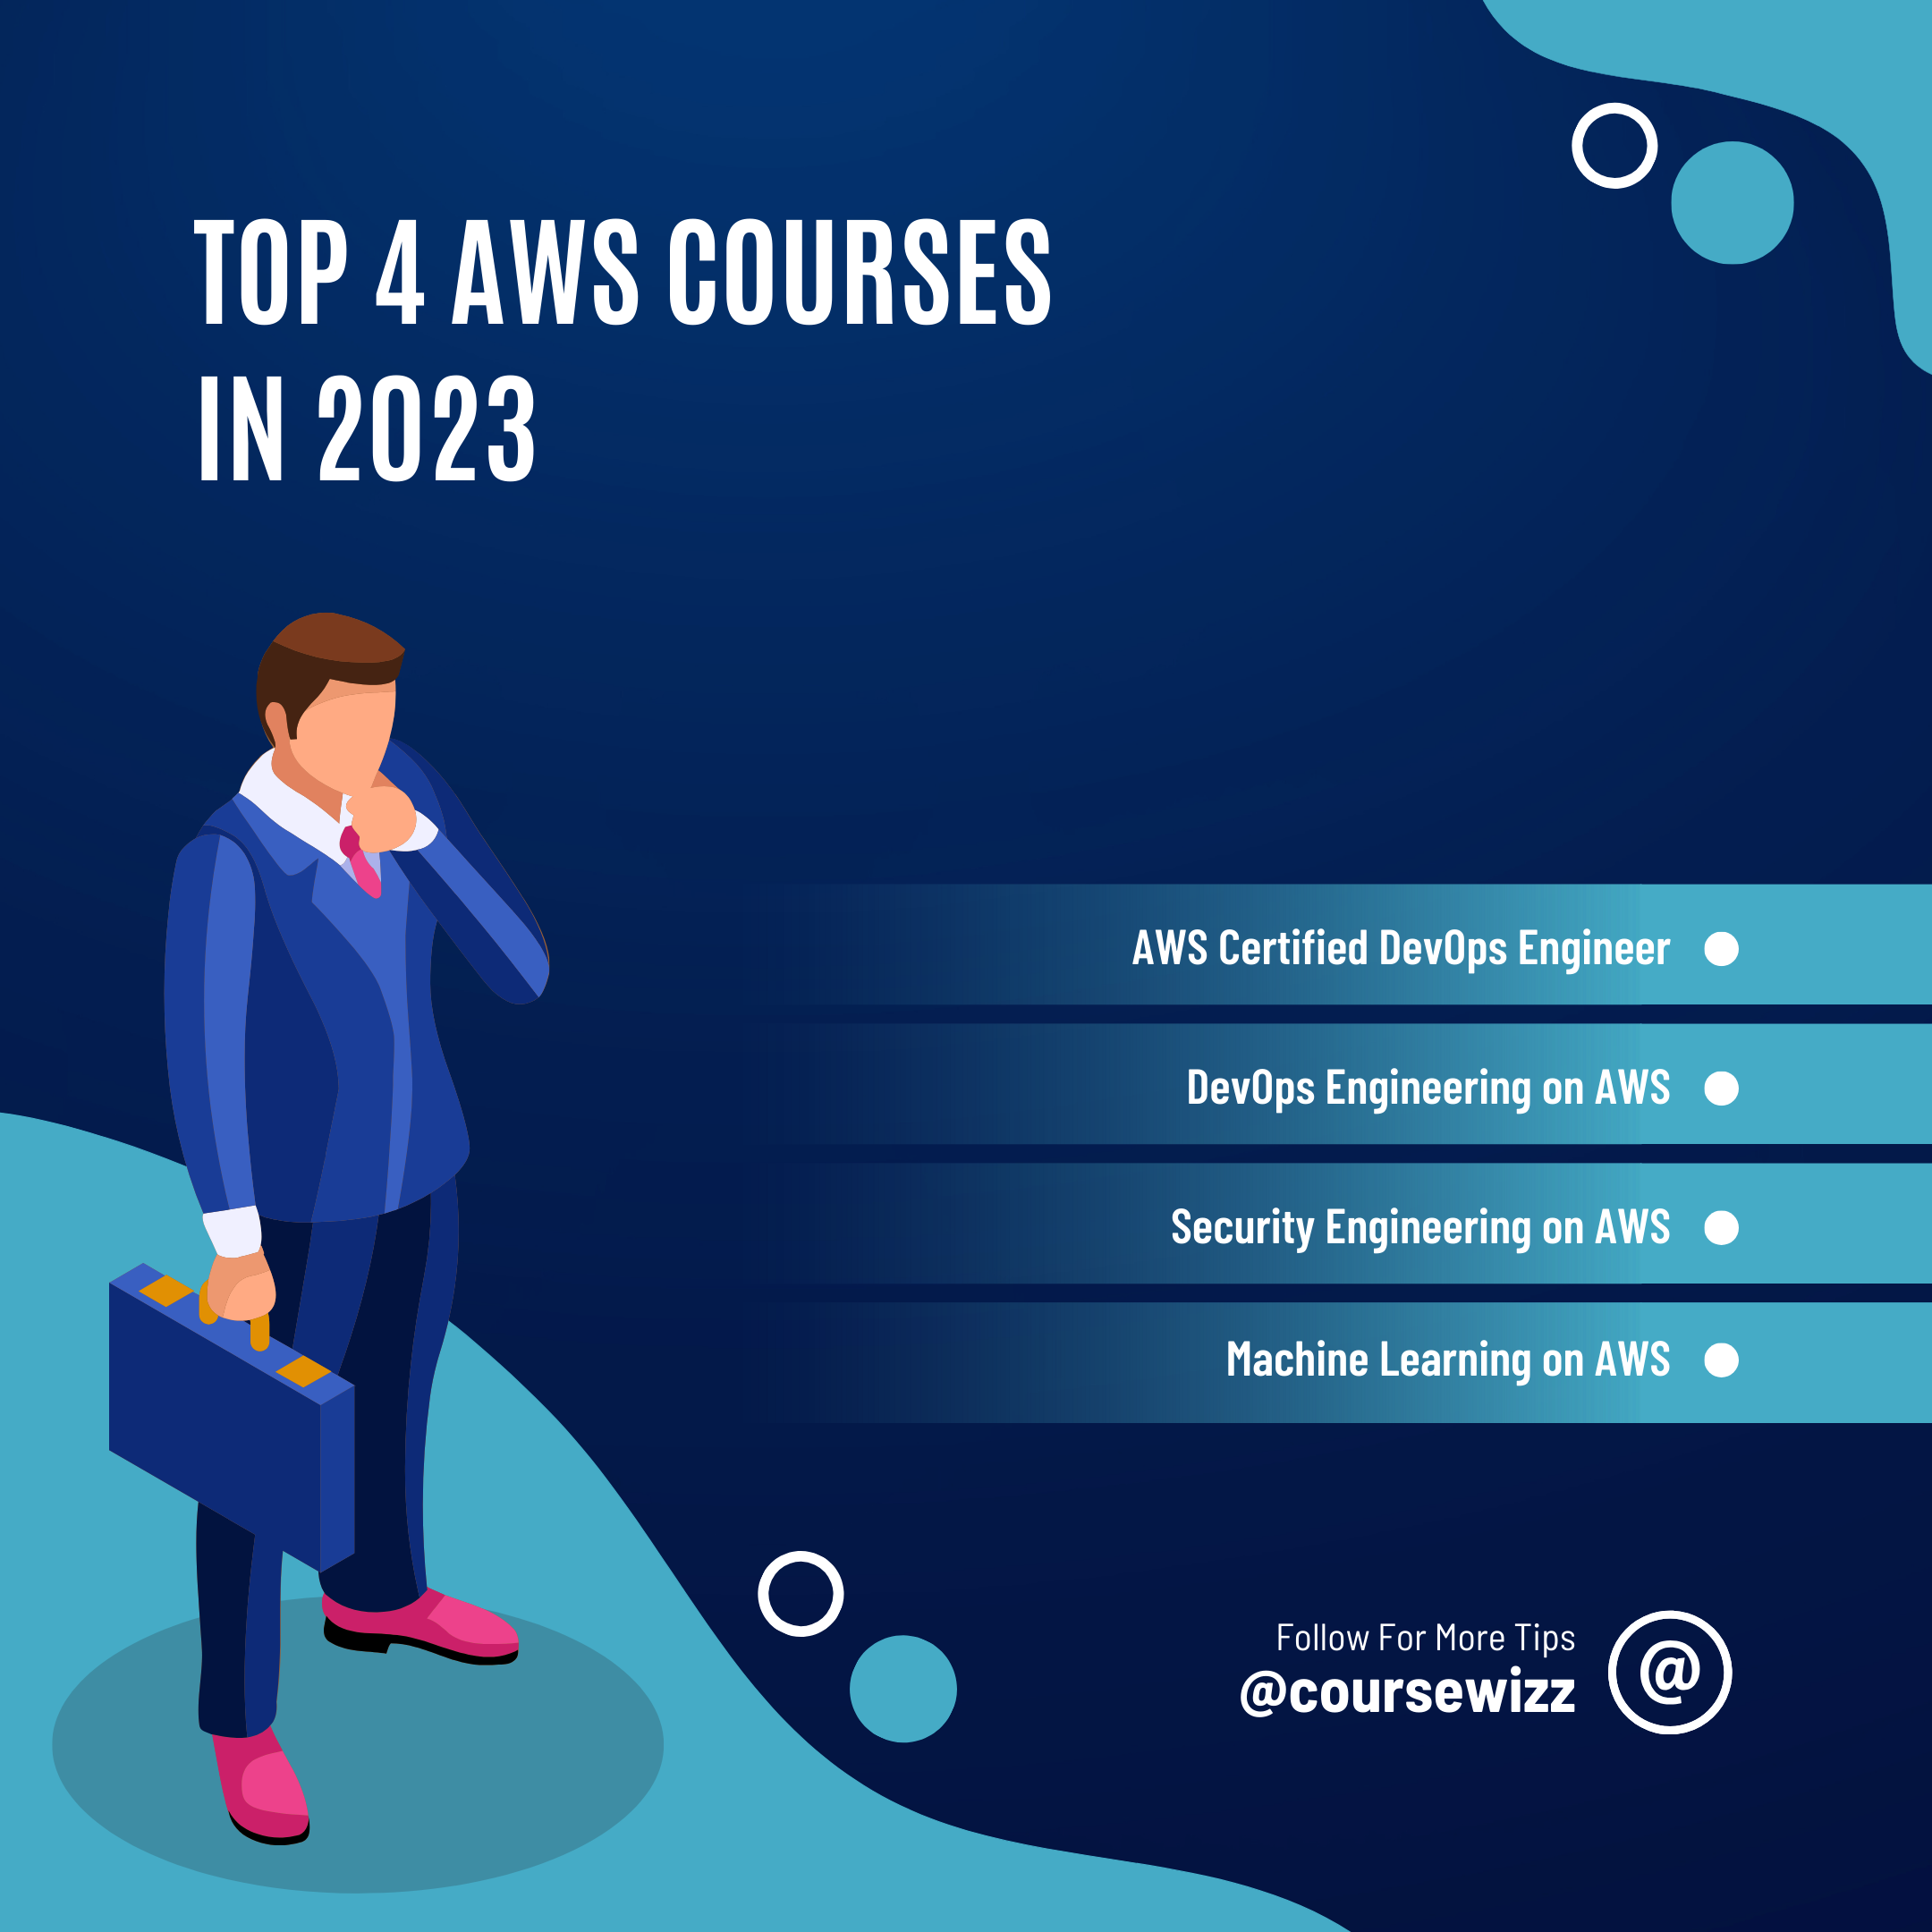 Top 4 AWS Courses in 2023